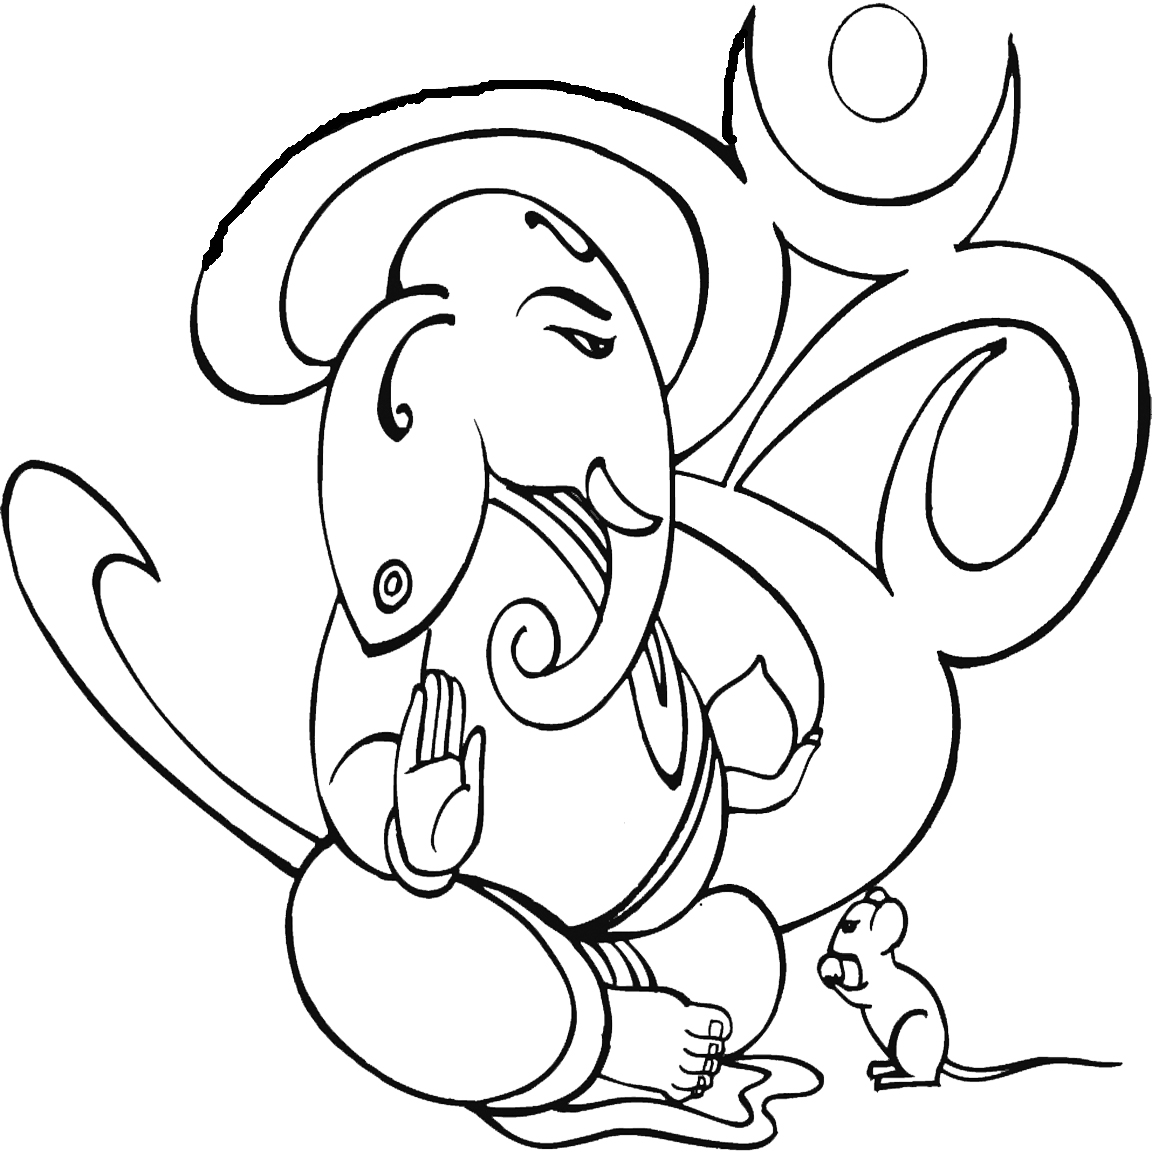 Lord Ganesha drawing easy and simple sketch|#FabArtistMe - YouTube-saigonsouth.com.vn